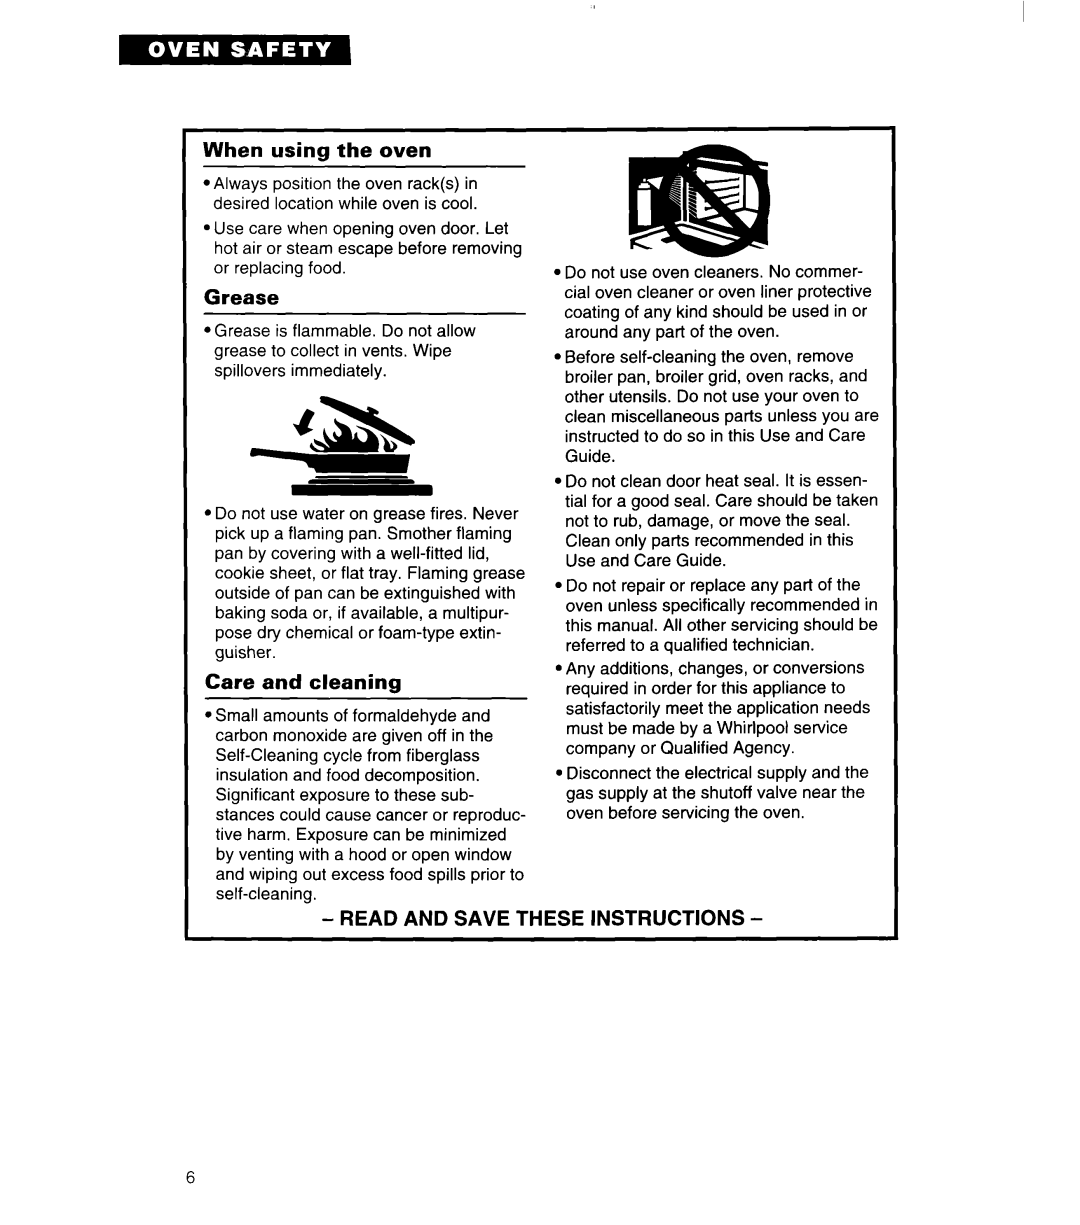 Whirlpool SB160PED warranty When using the oven, Grease, Care and cleaning, Read And Save These Instructions, l l l l l l 